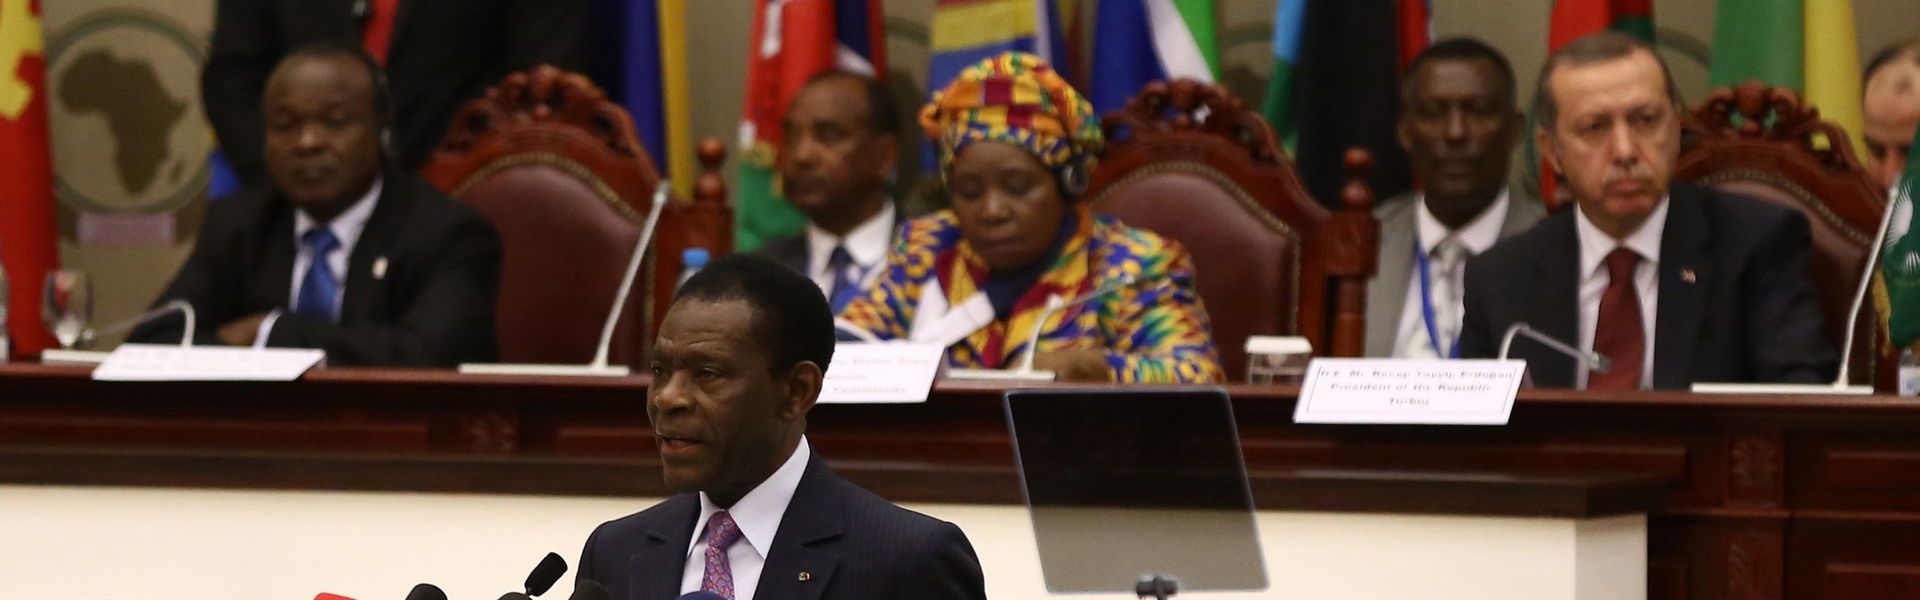 President of Equatorial Guinea Teodoro Obiang Nguema Mbasogo speaks during the Second Turkey- Africa Partnership Summit at Sipopo Congress Center in Malabo, Equatorial Guinea.